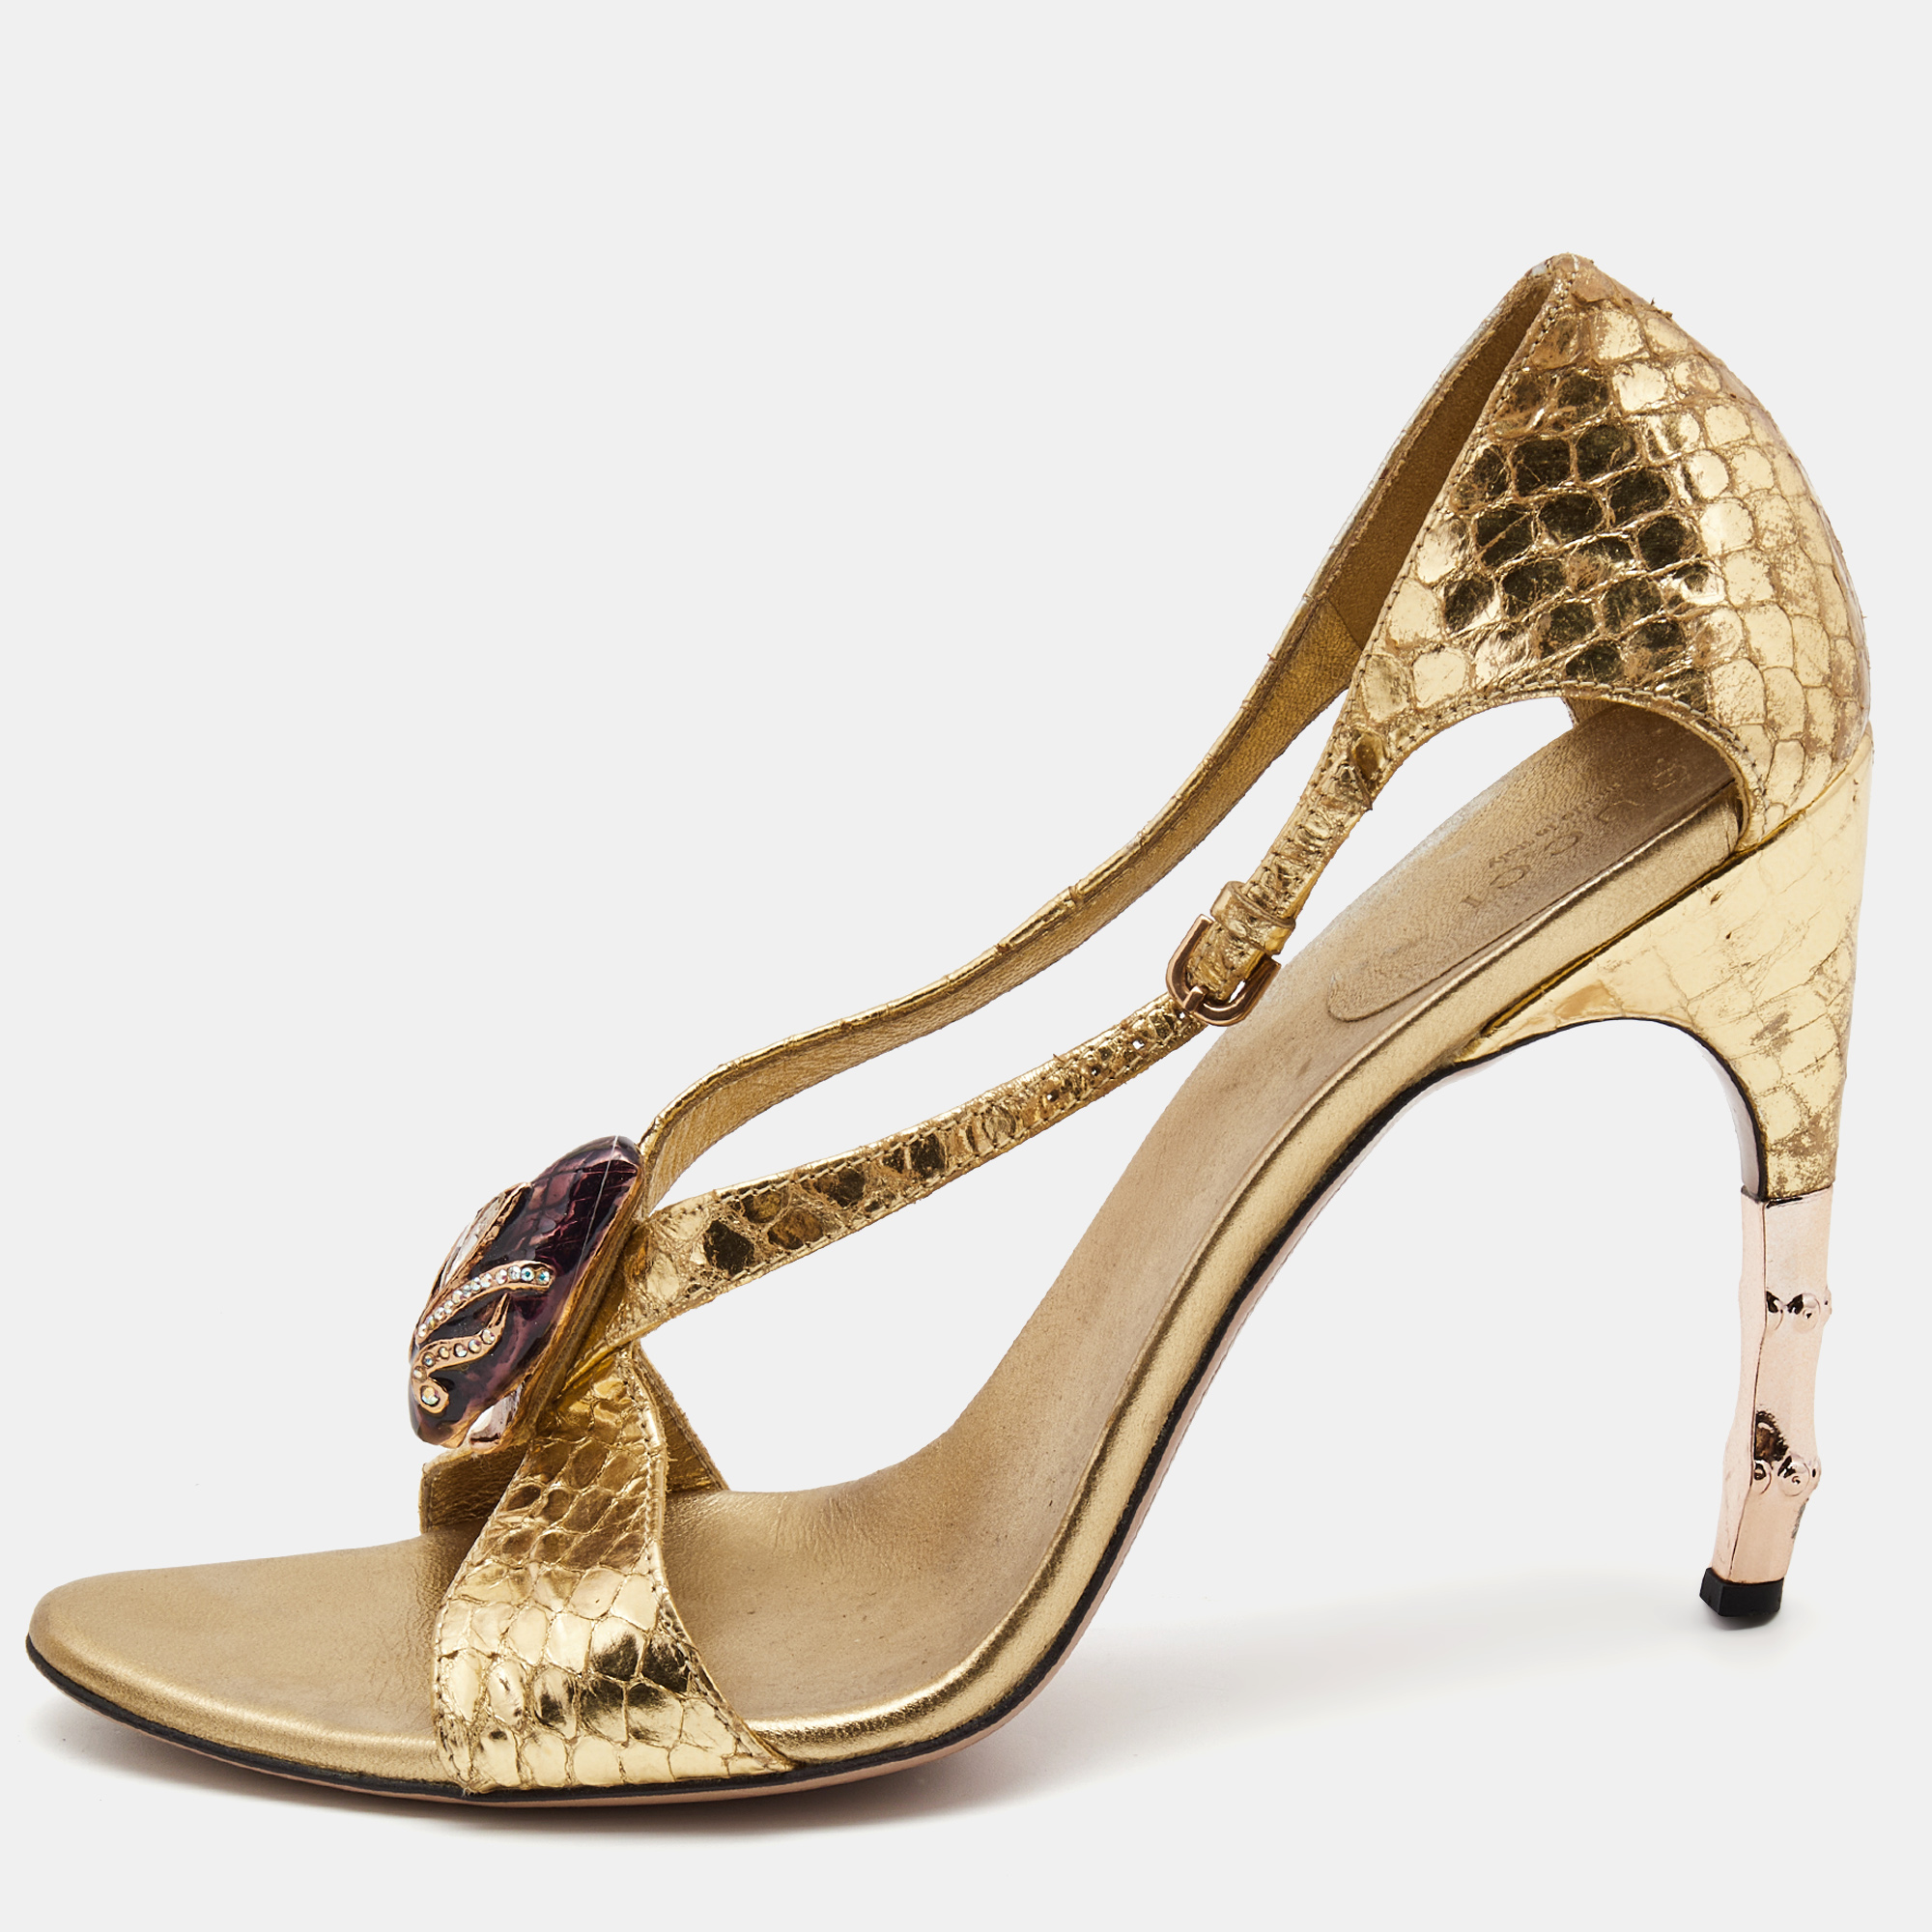 Gucci gold python embossed leather jeweled sandals size 38